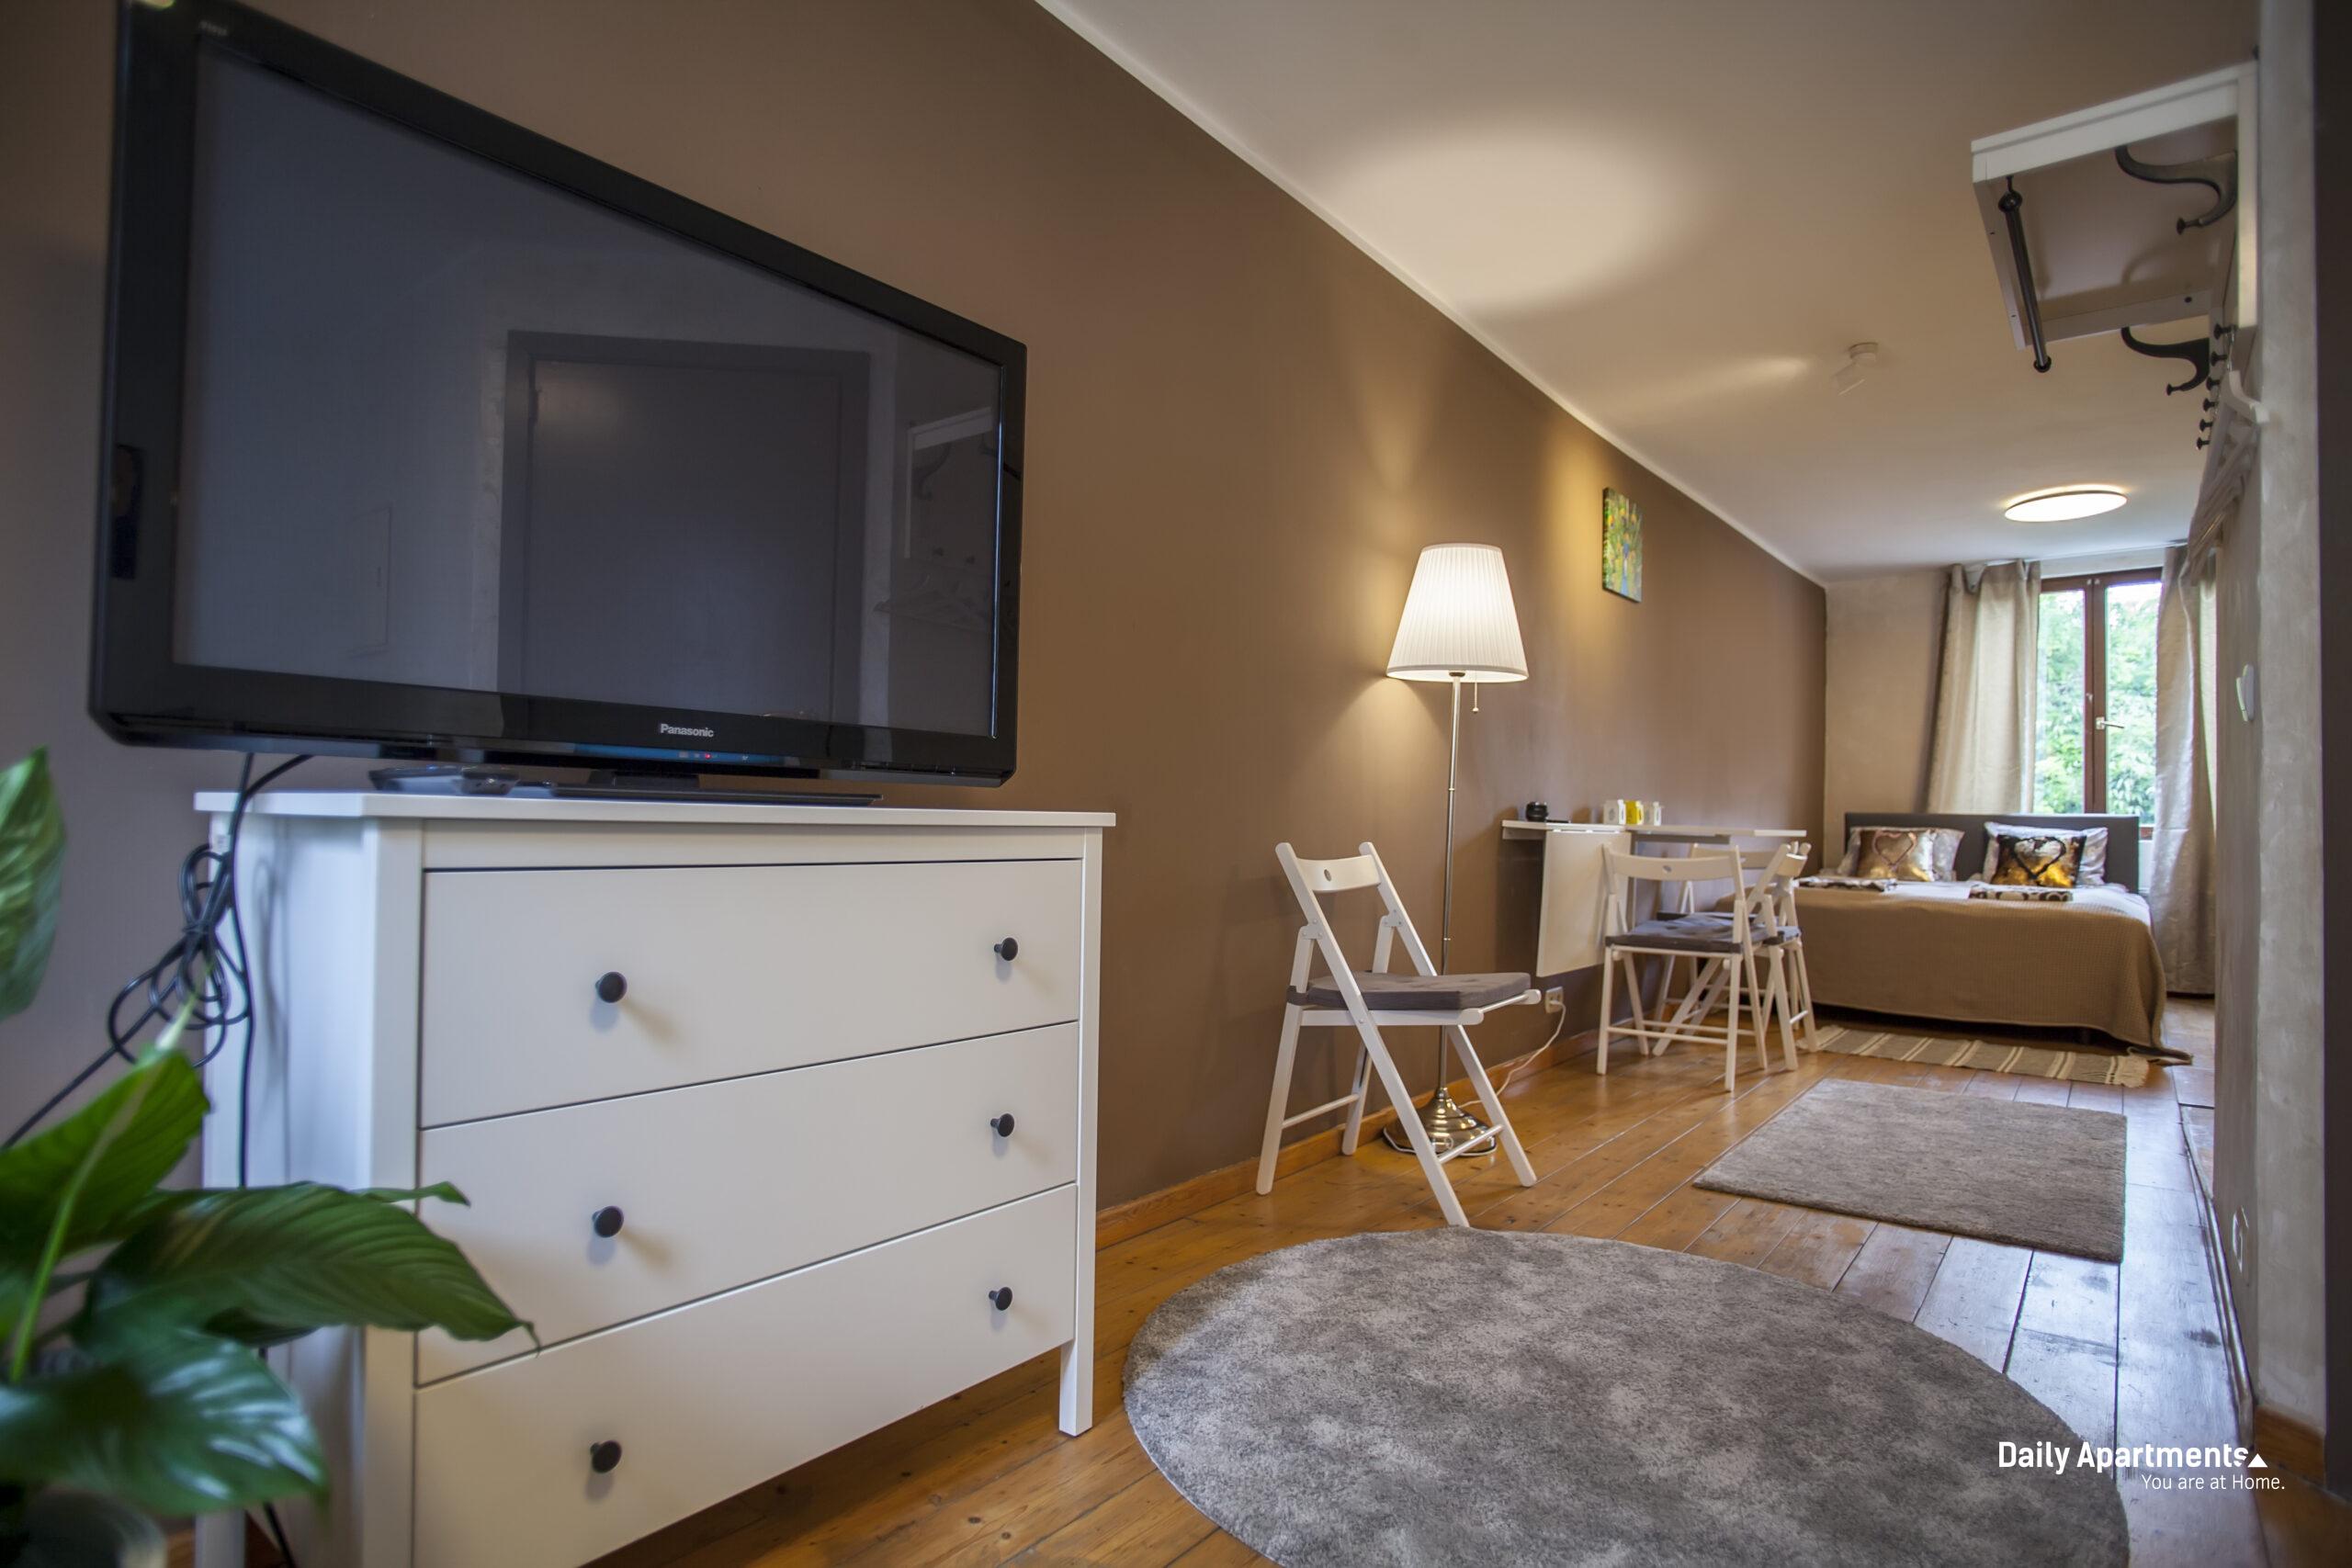 Daily Apartments - Antwerp City - Studio style apartment in City center